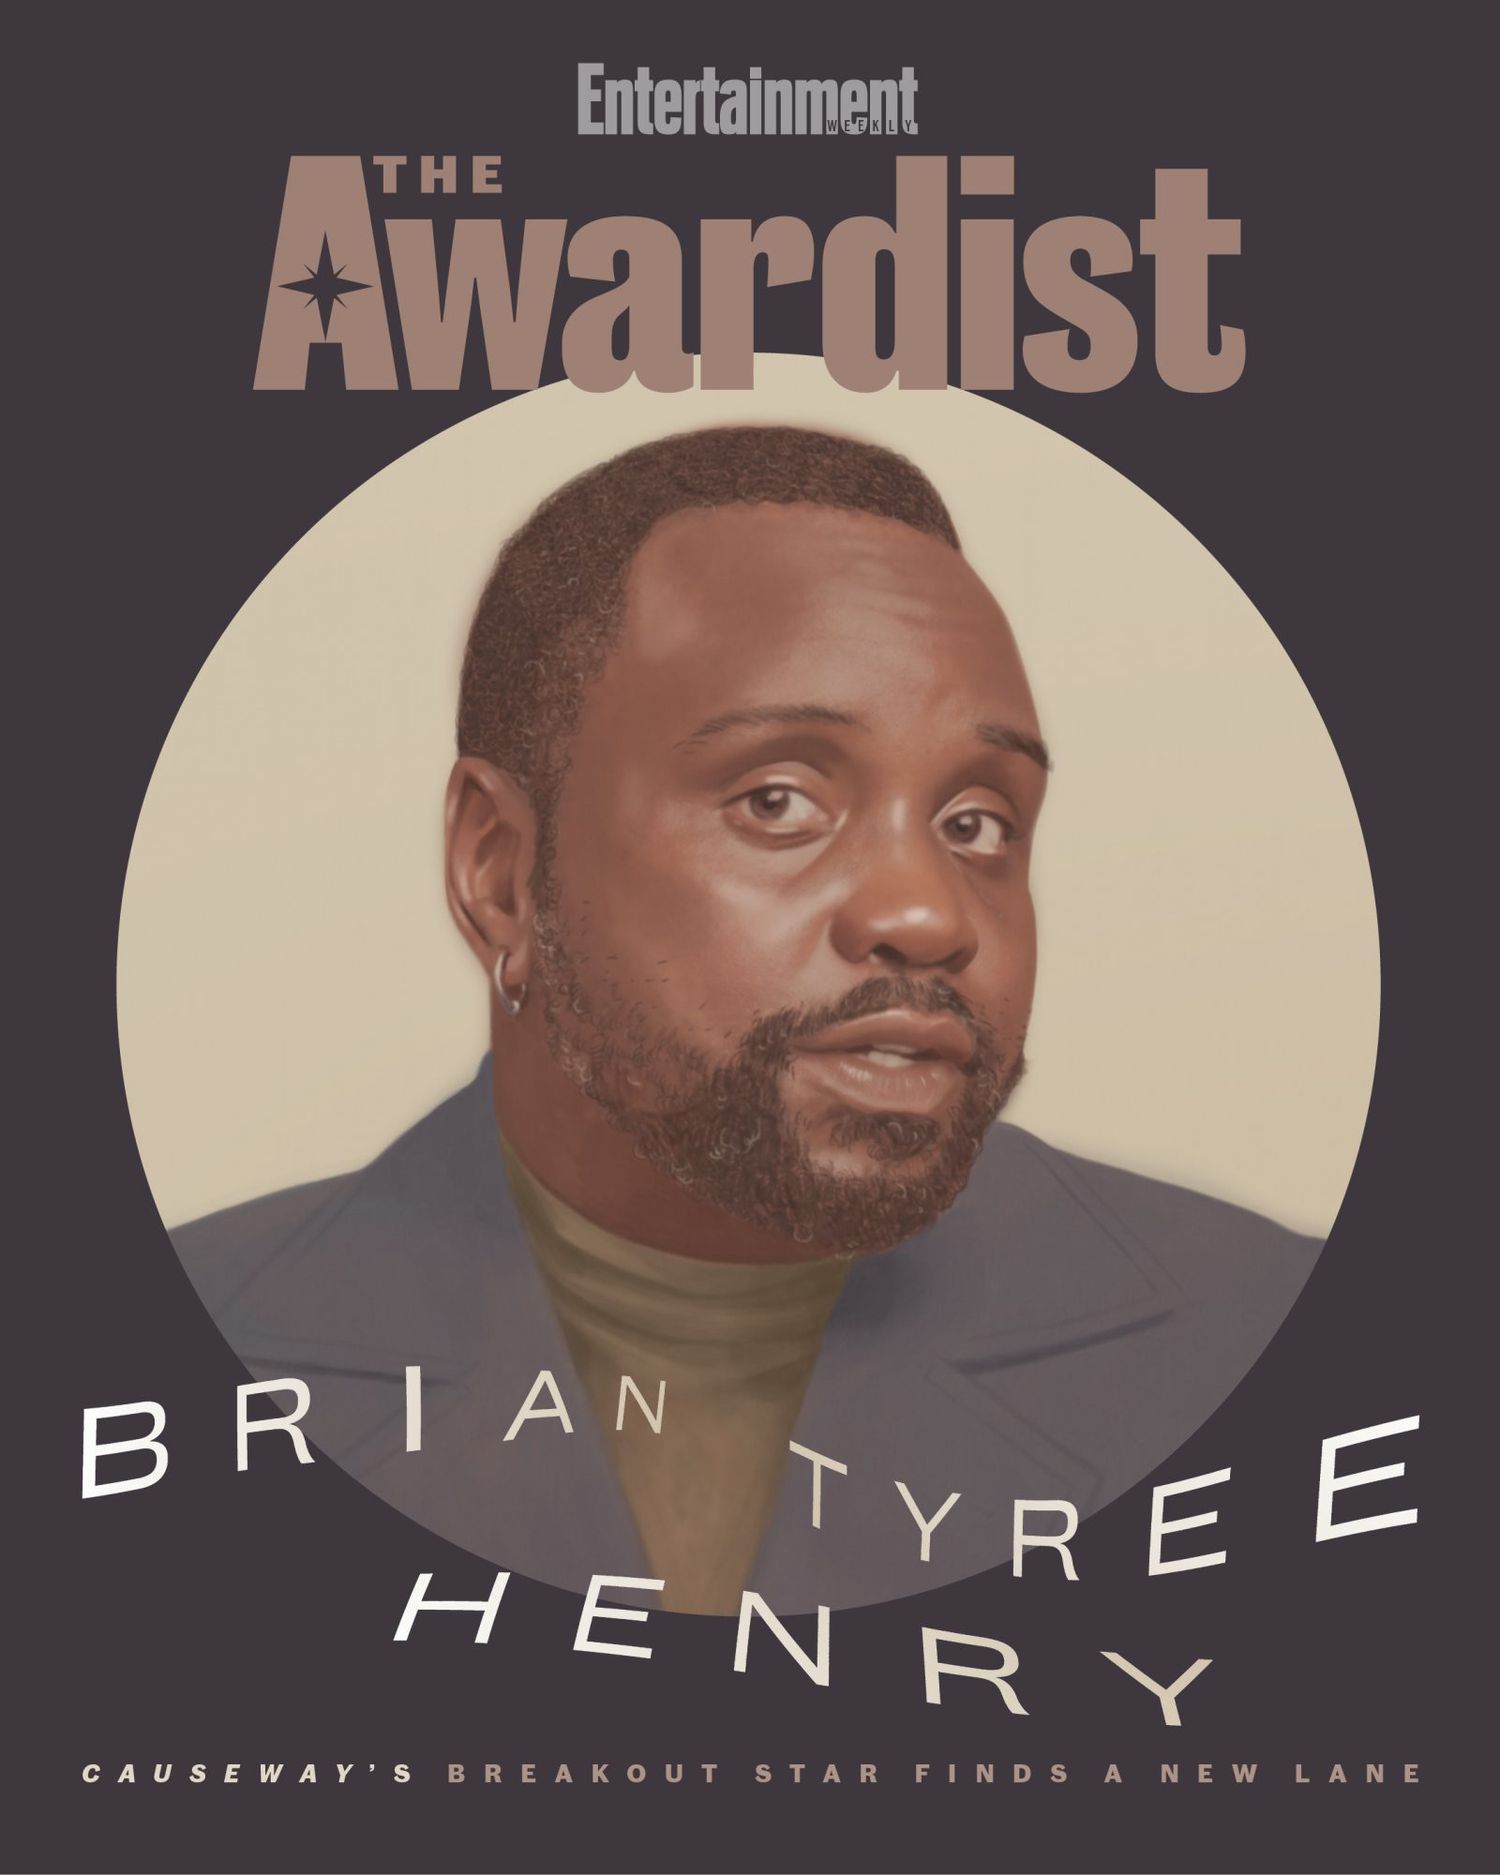 ‘Causeway’ star Brian Tyree Henry, our Heat Index, and more in EW’s ‘The Awardist’